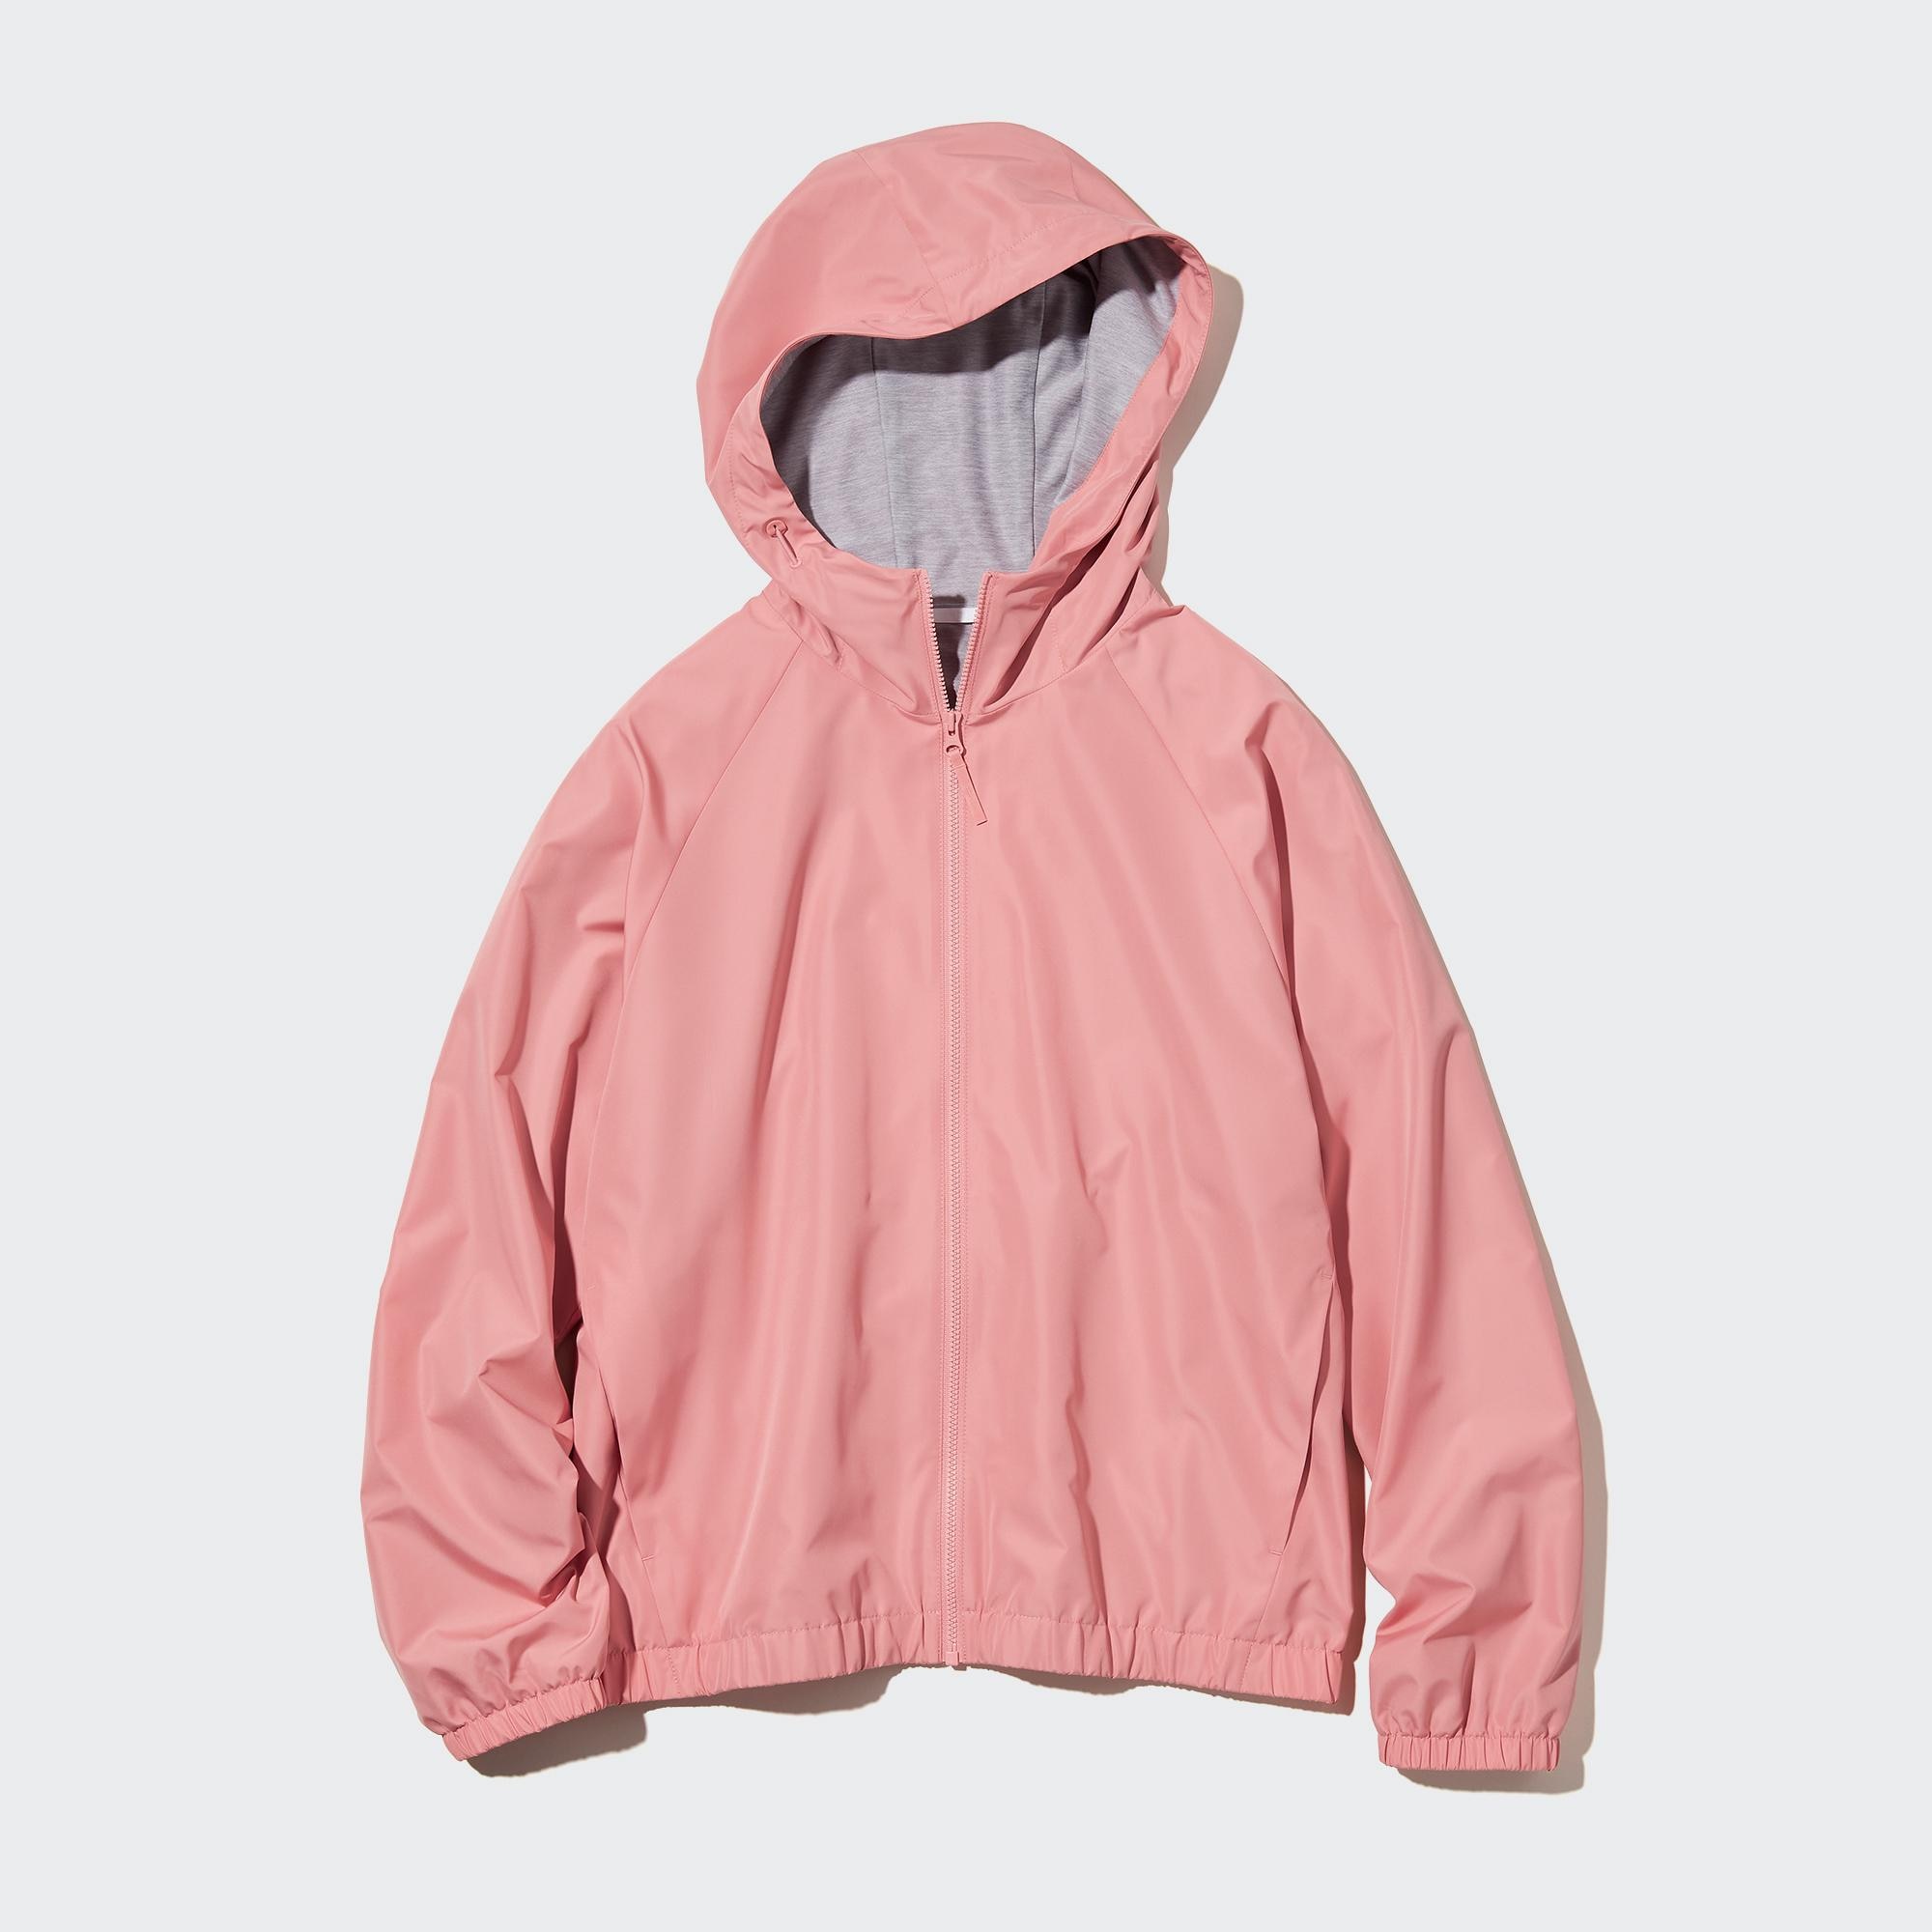 UNIQLO Smooth Jersey Lined Parka | StyleHint